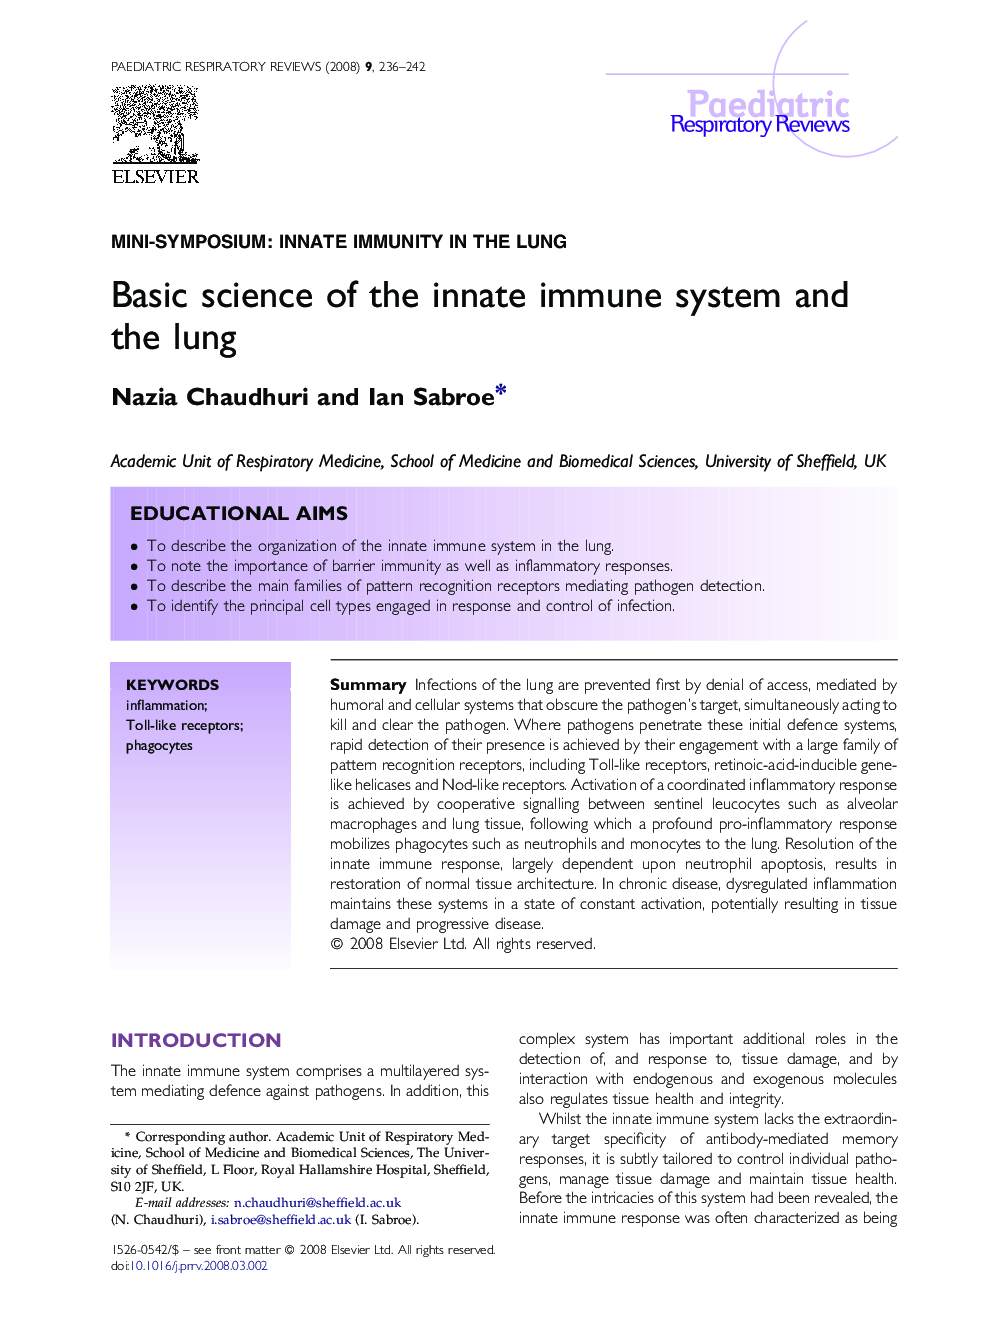 Basic science of the innate immune system and the lung